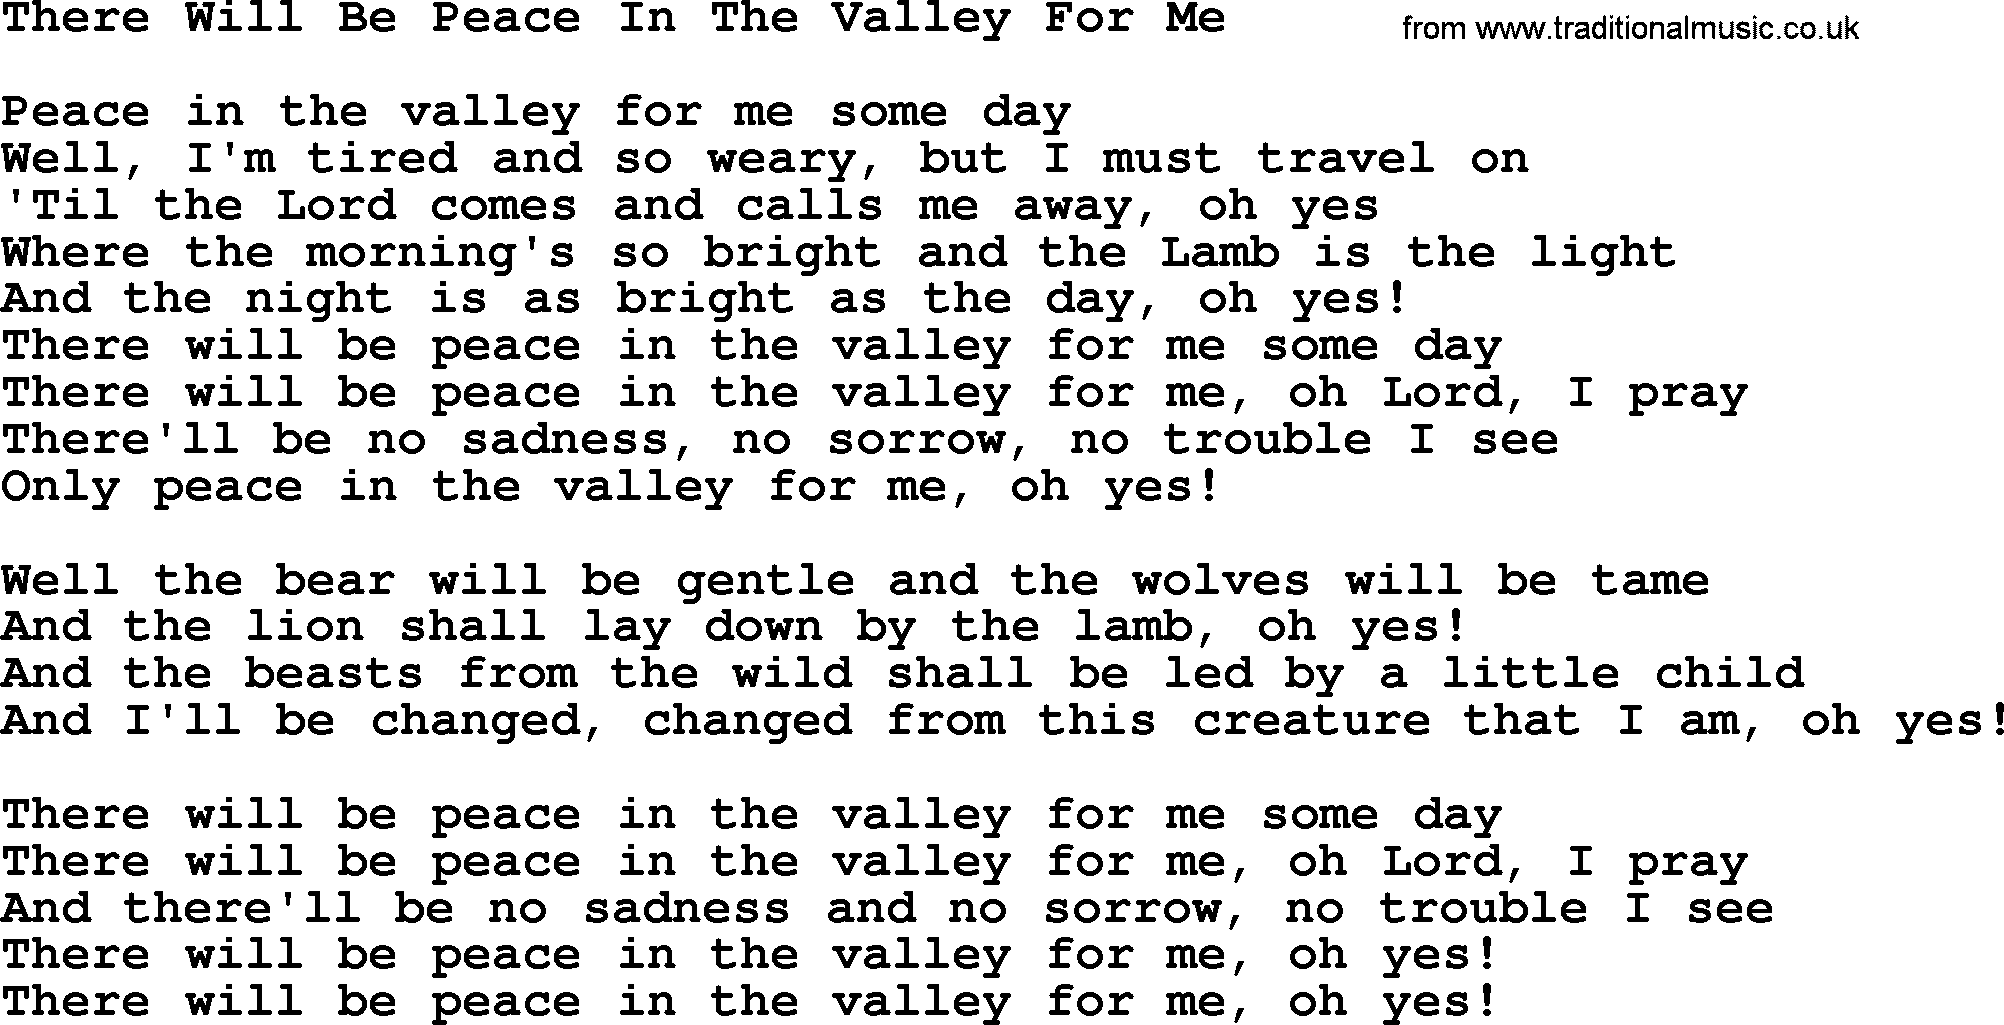 Dolly Parton song There Will Be Peace In The Valley For Me.txt lyrics